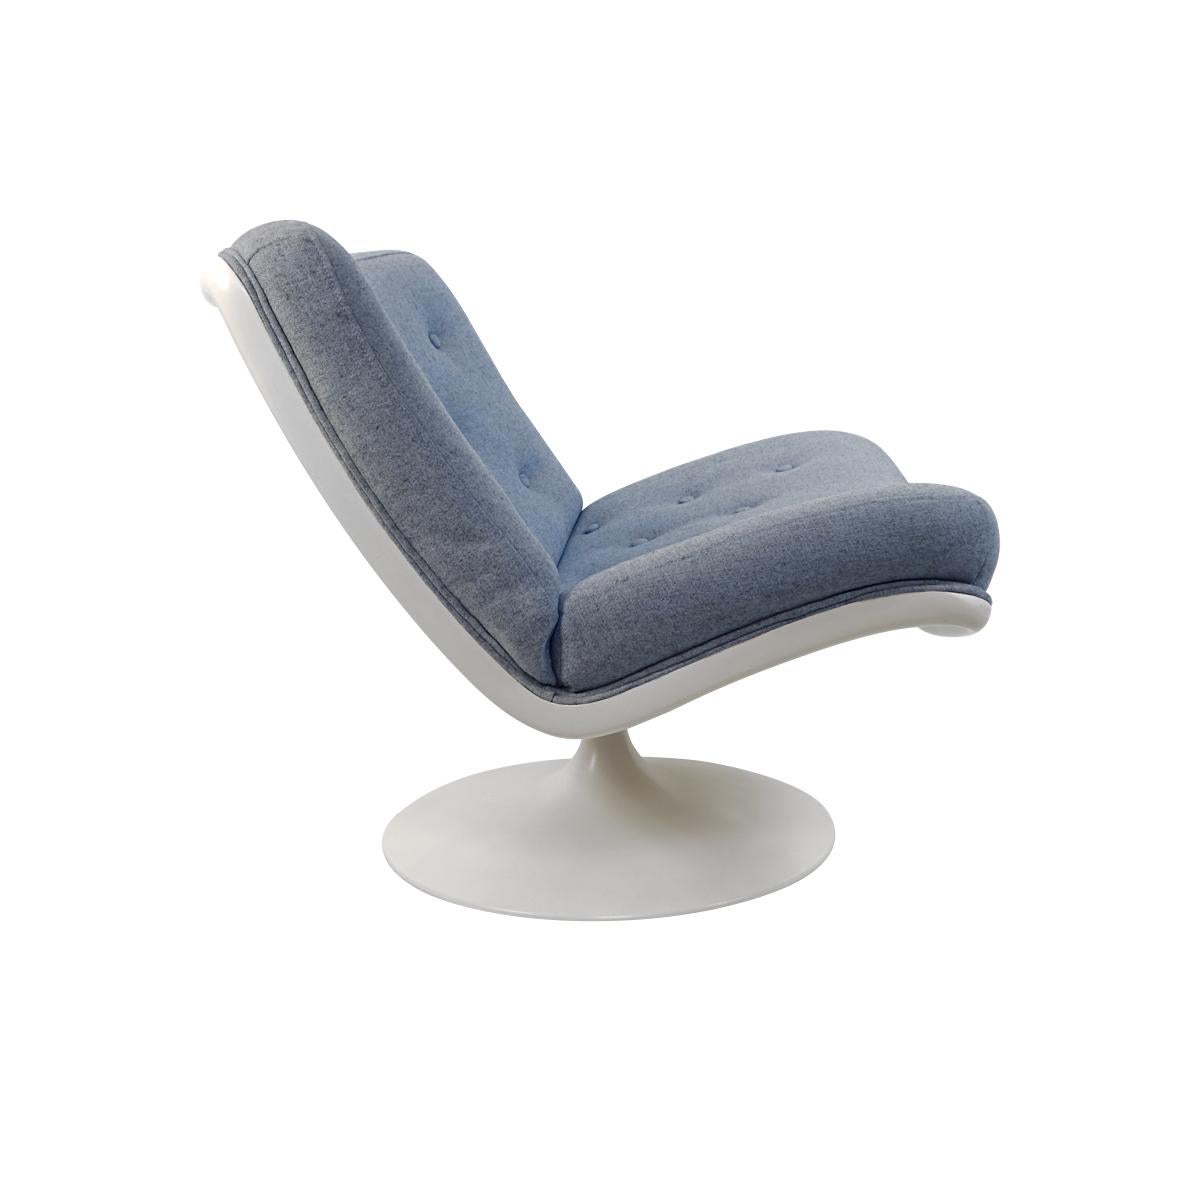 One of the most beautiful undiscovered gems created by the British designer Geoffrey David Harcourt, born in 1935, is as far as we are concerned the model 508 with un-upholstered back. The immaculate white bucket seat with dito tulip shaped base